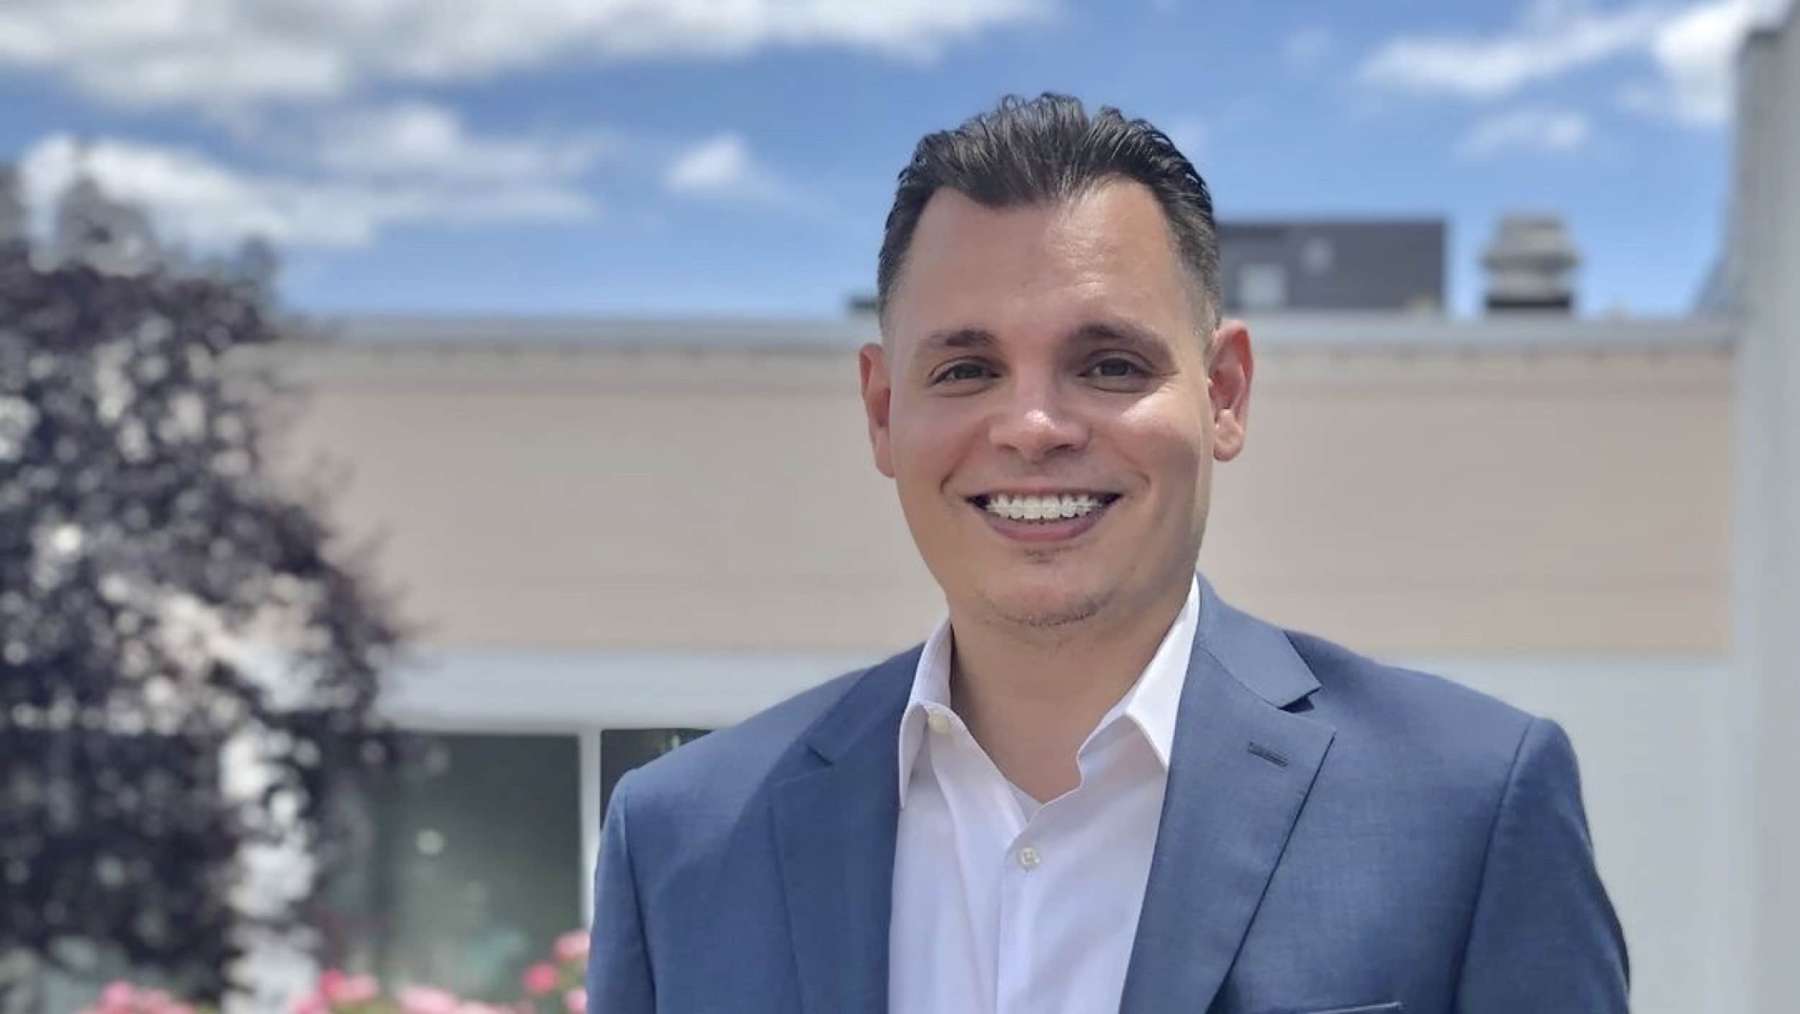 An interview with House District 16 candidate Brandon Potter